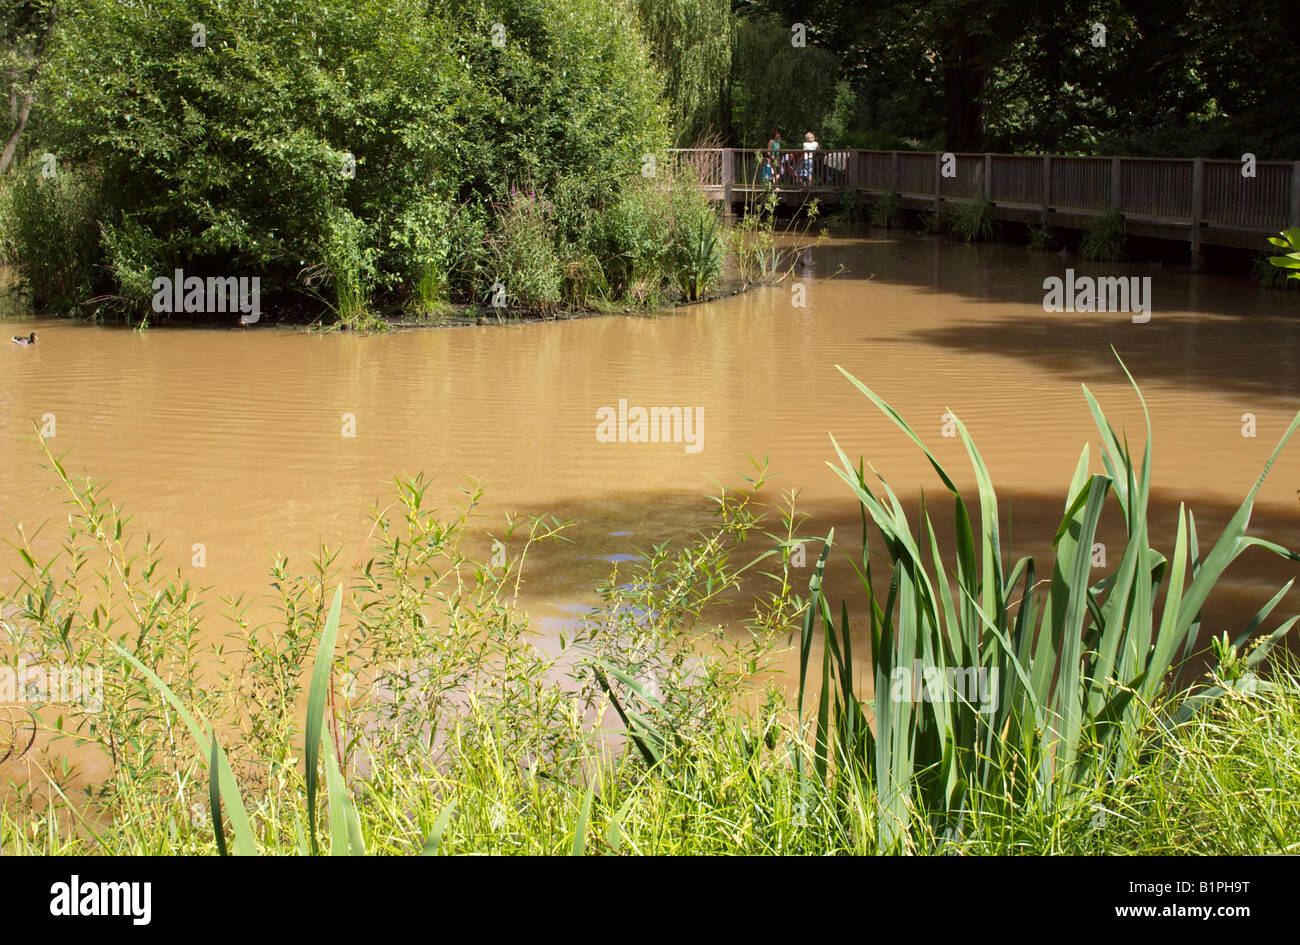 Artificial lake in a park in England with brown muddy water Stock Photo